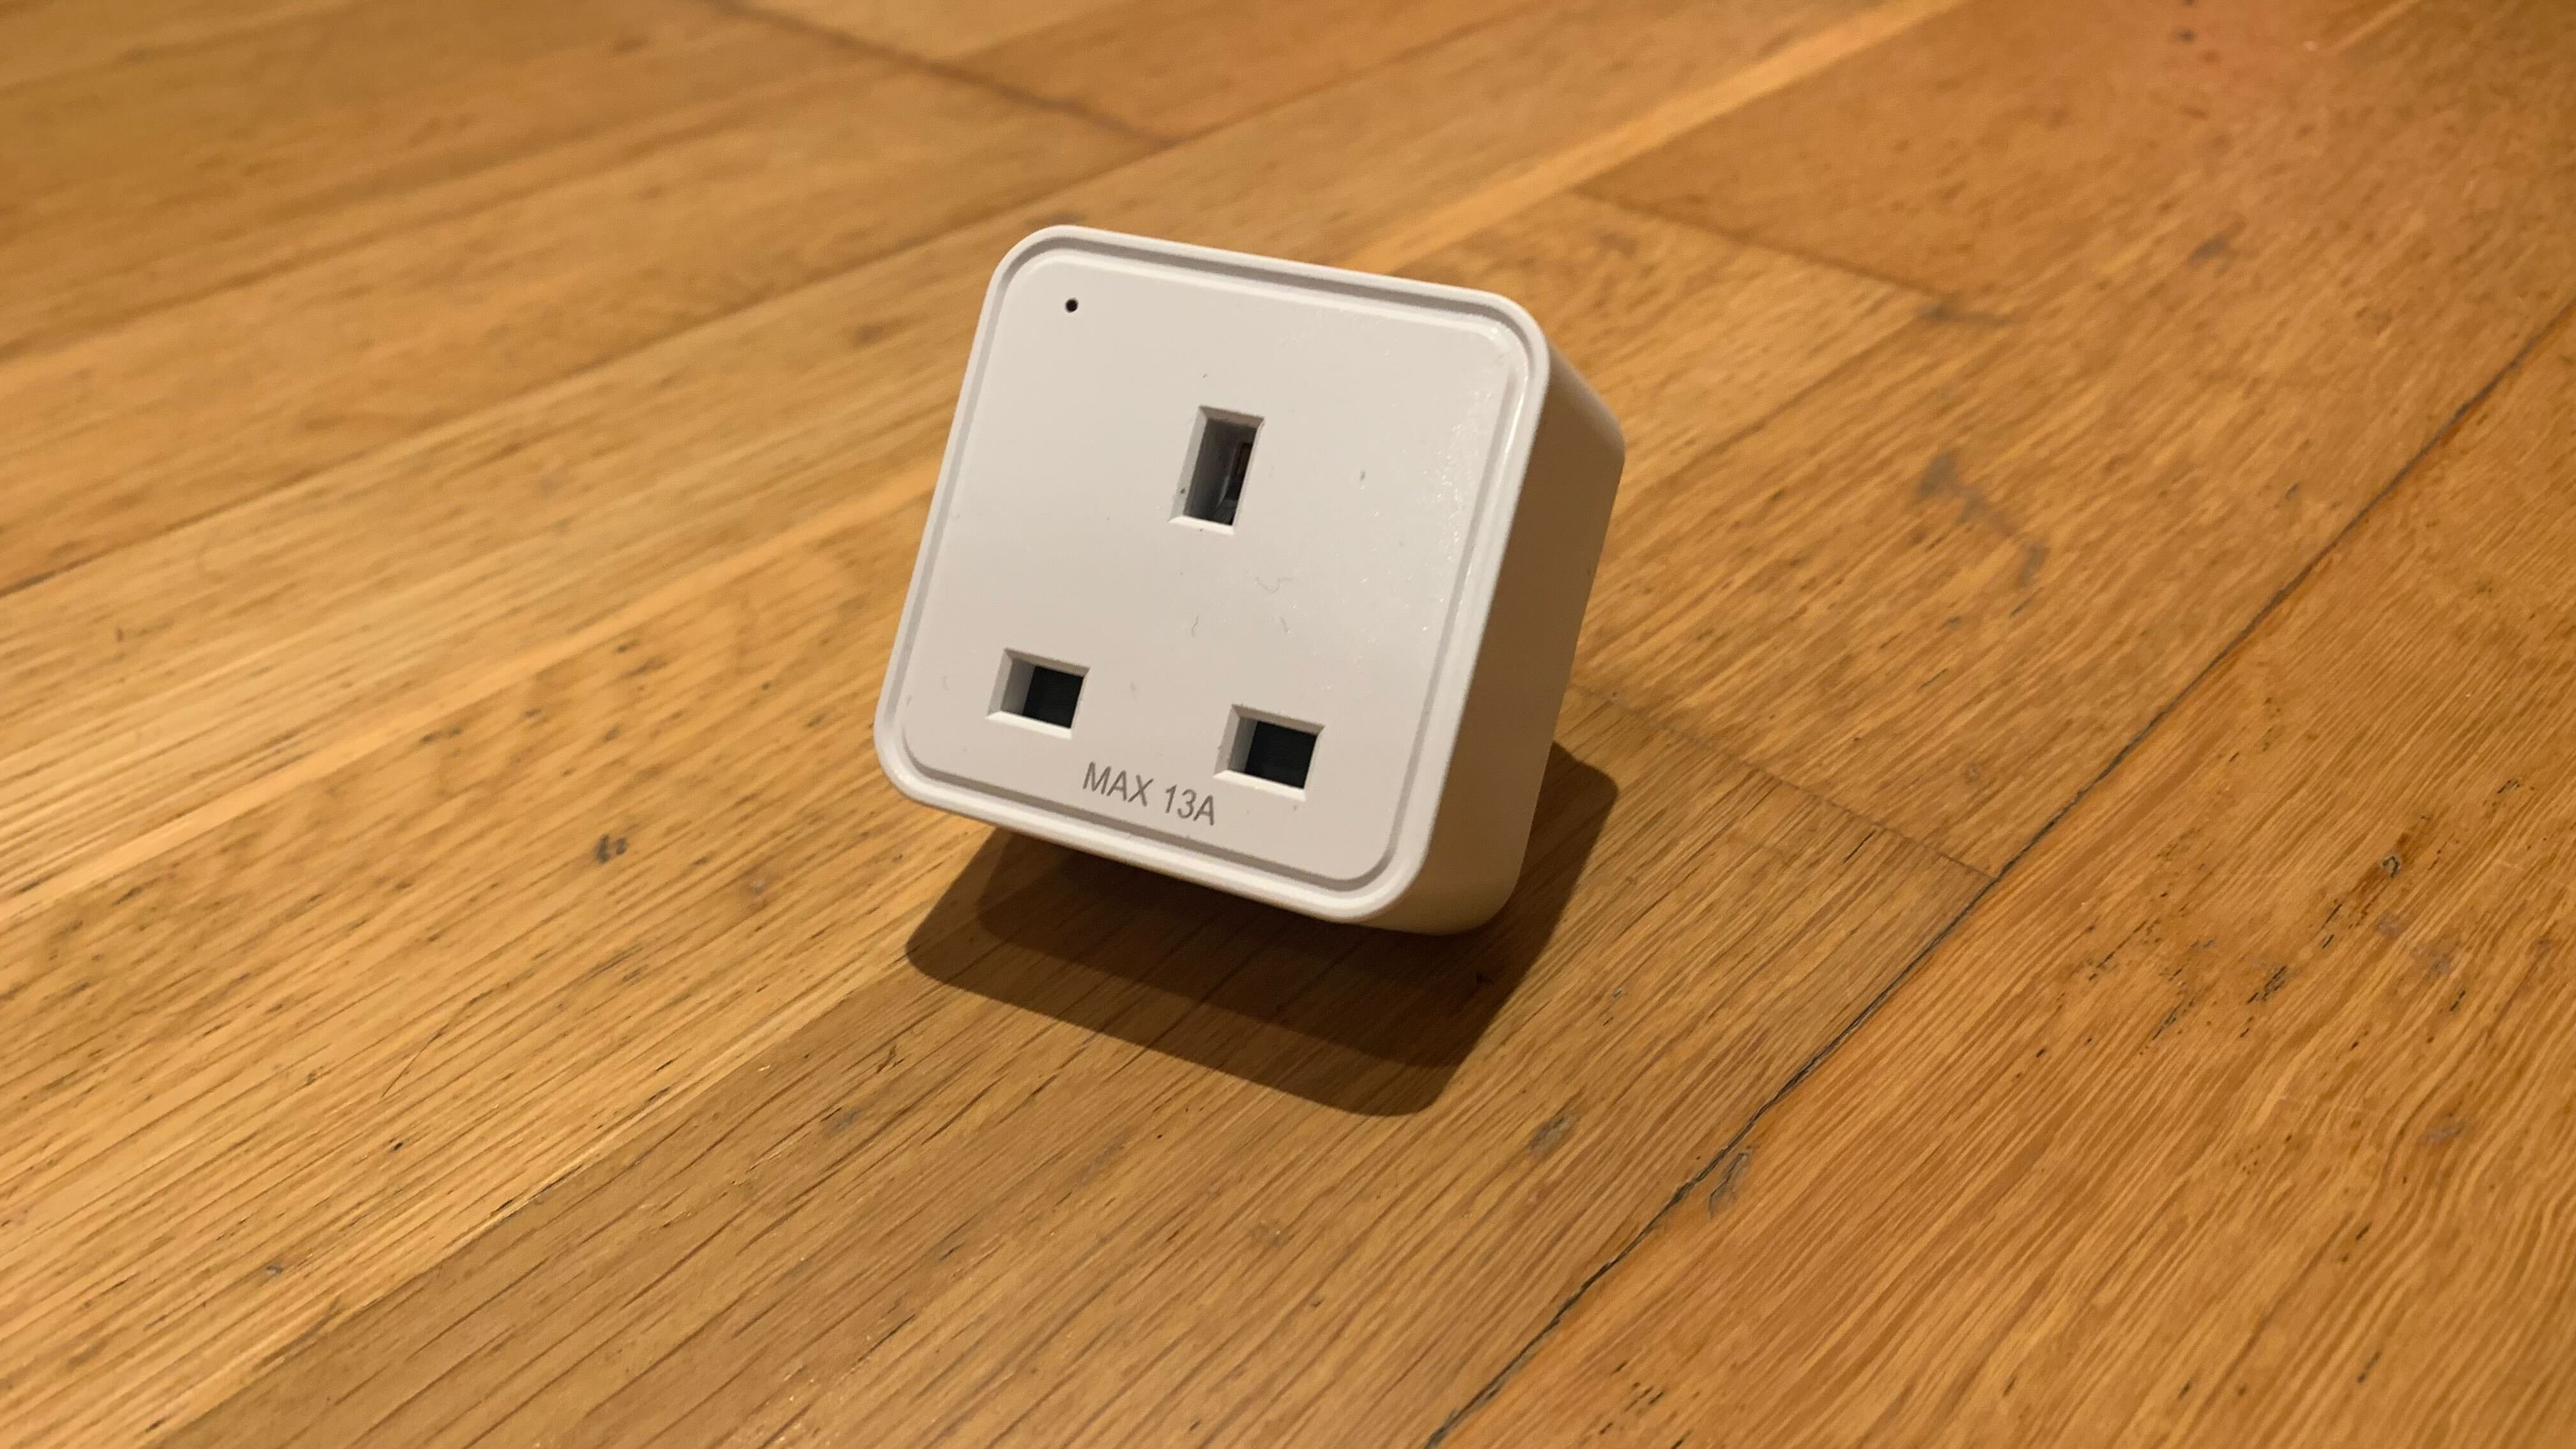 Do Any Smart Plugs Work On 5 Ghz WiFi? [Smart Home Point]